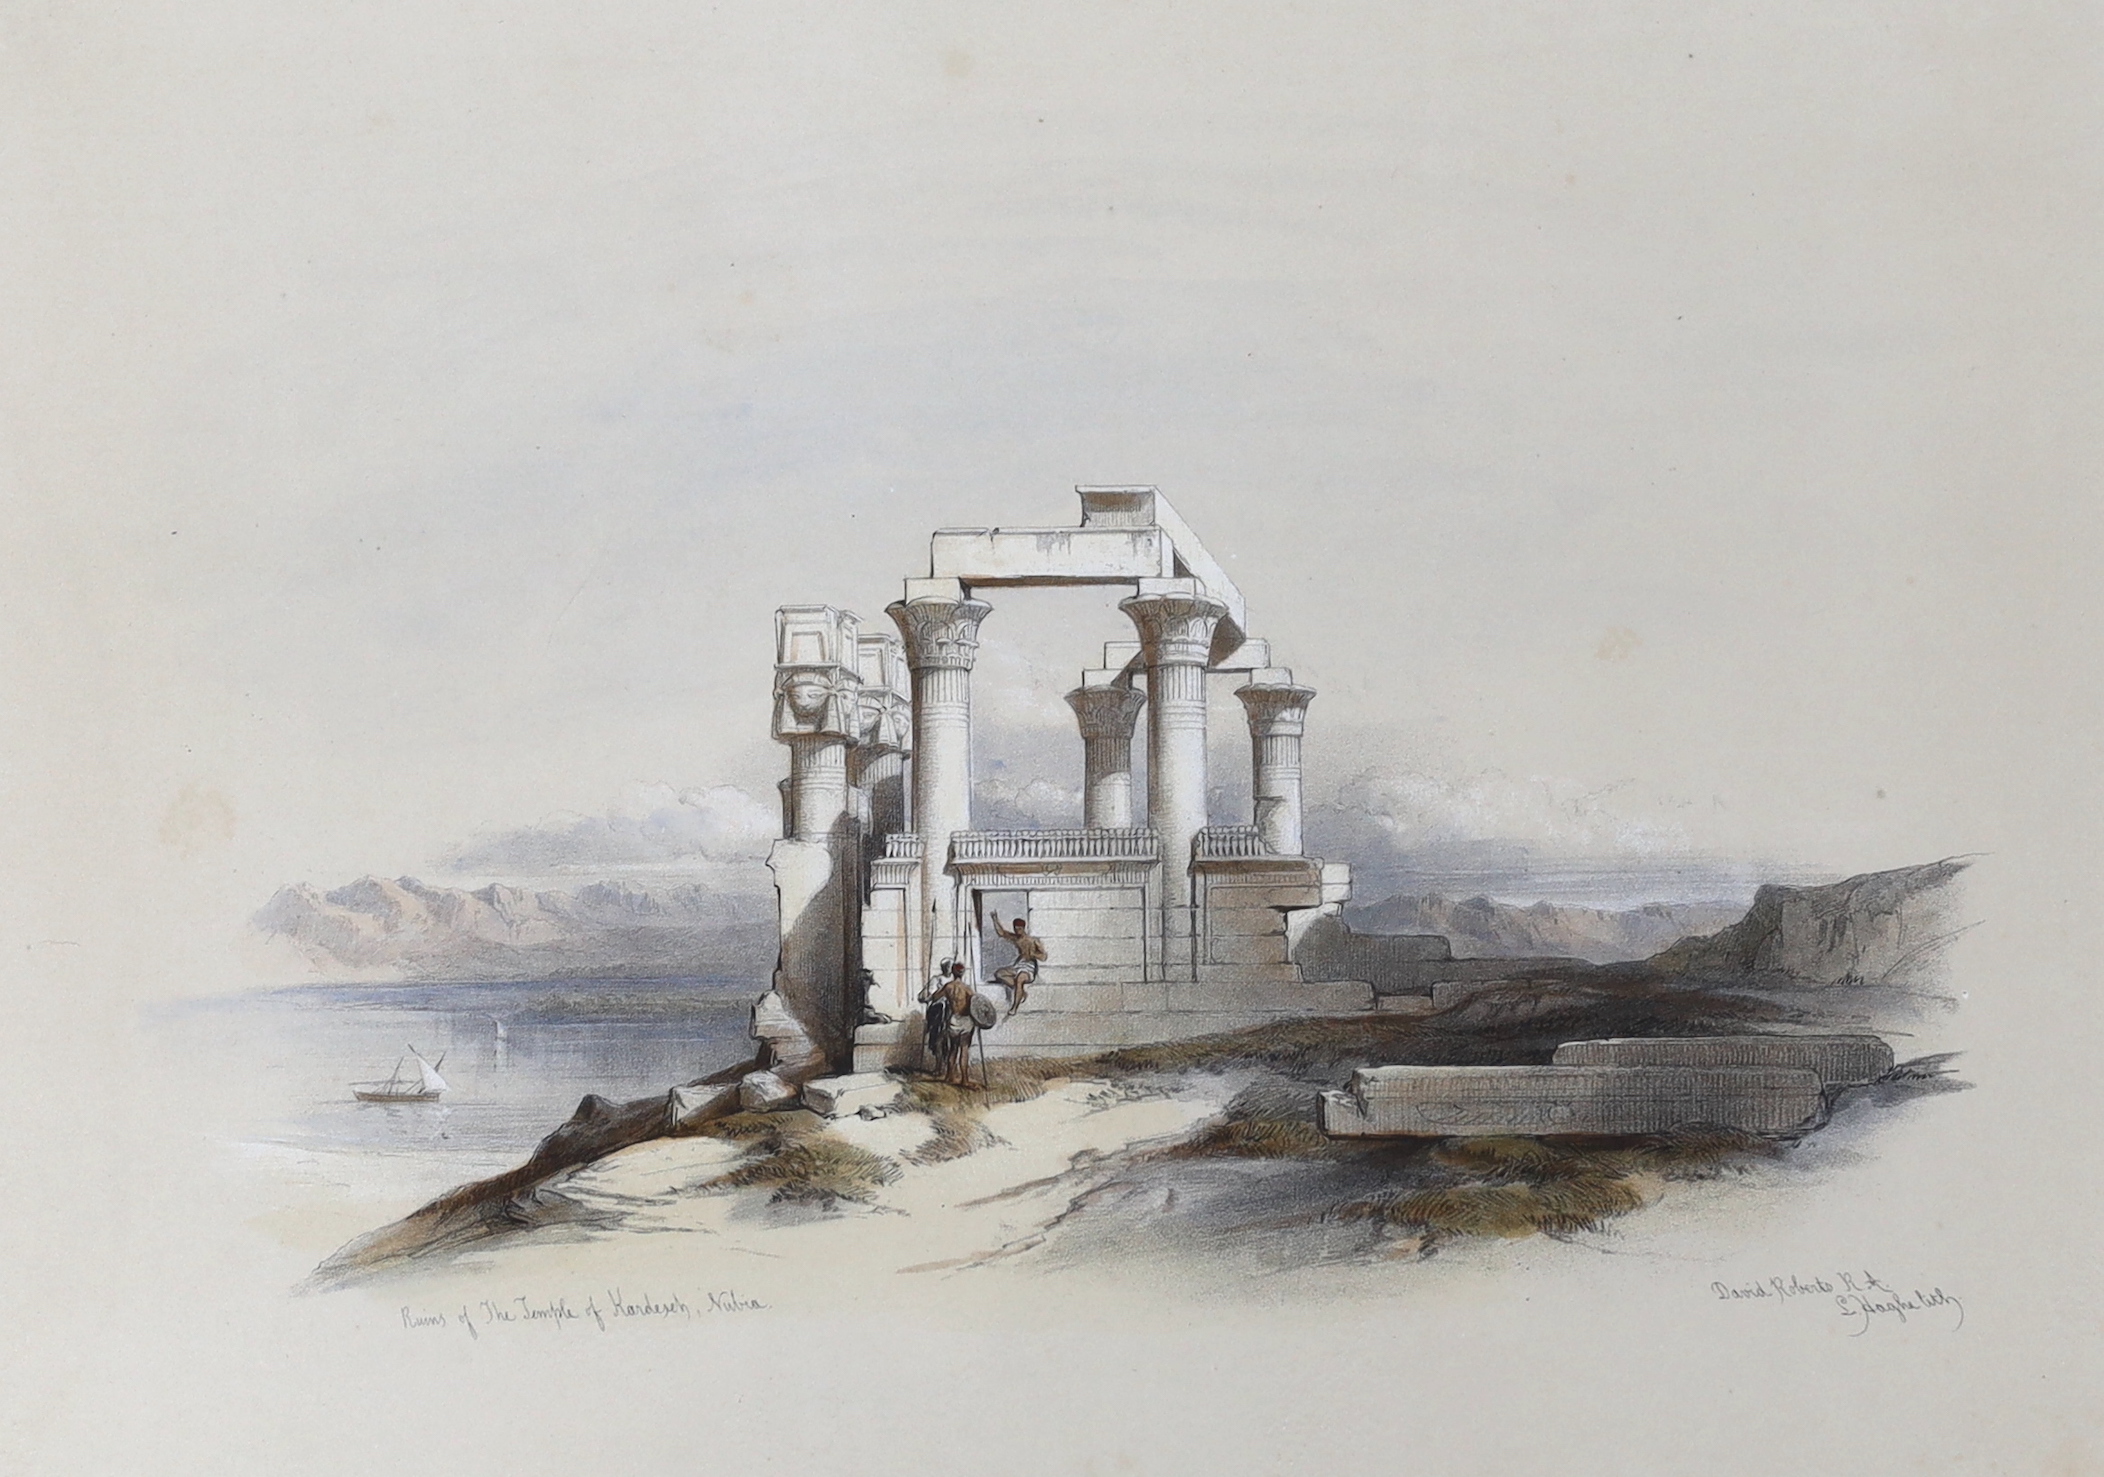 David Roberts (Scottish, 1796-1864), colour lithograph, 'Ruins of the Temple of Kardeseh, Nubia', publ. F.G. Moon, 1st July 1848, text verso, 28 x 38cm